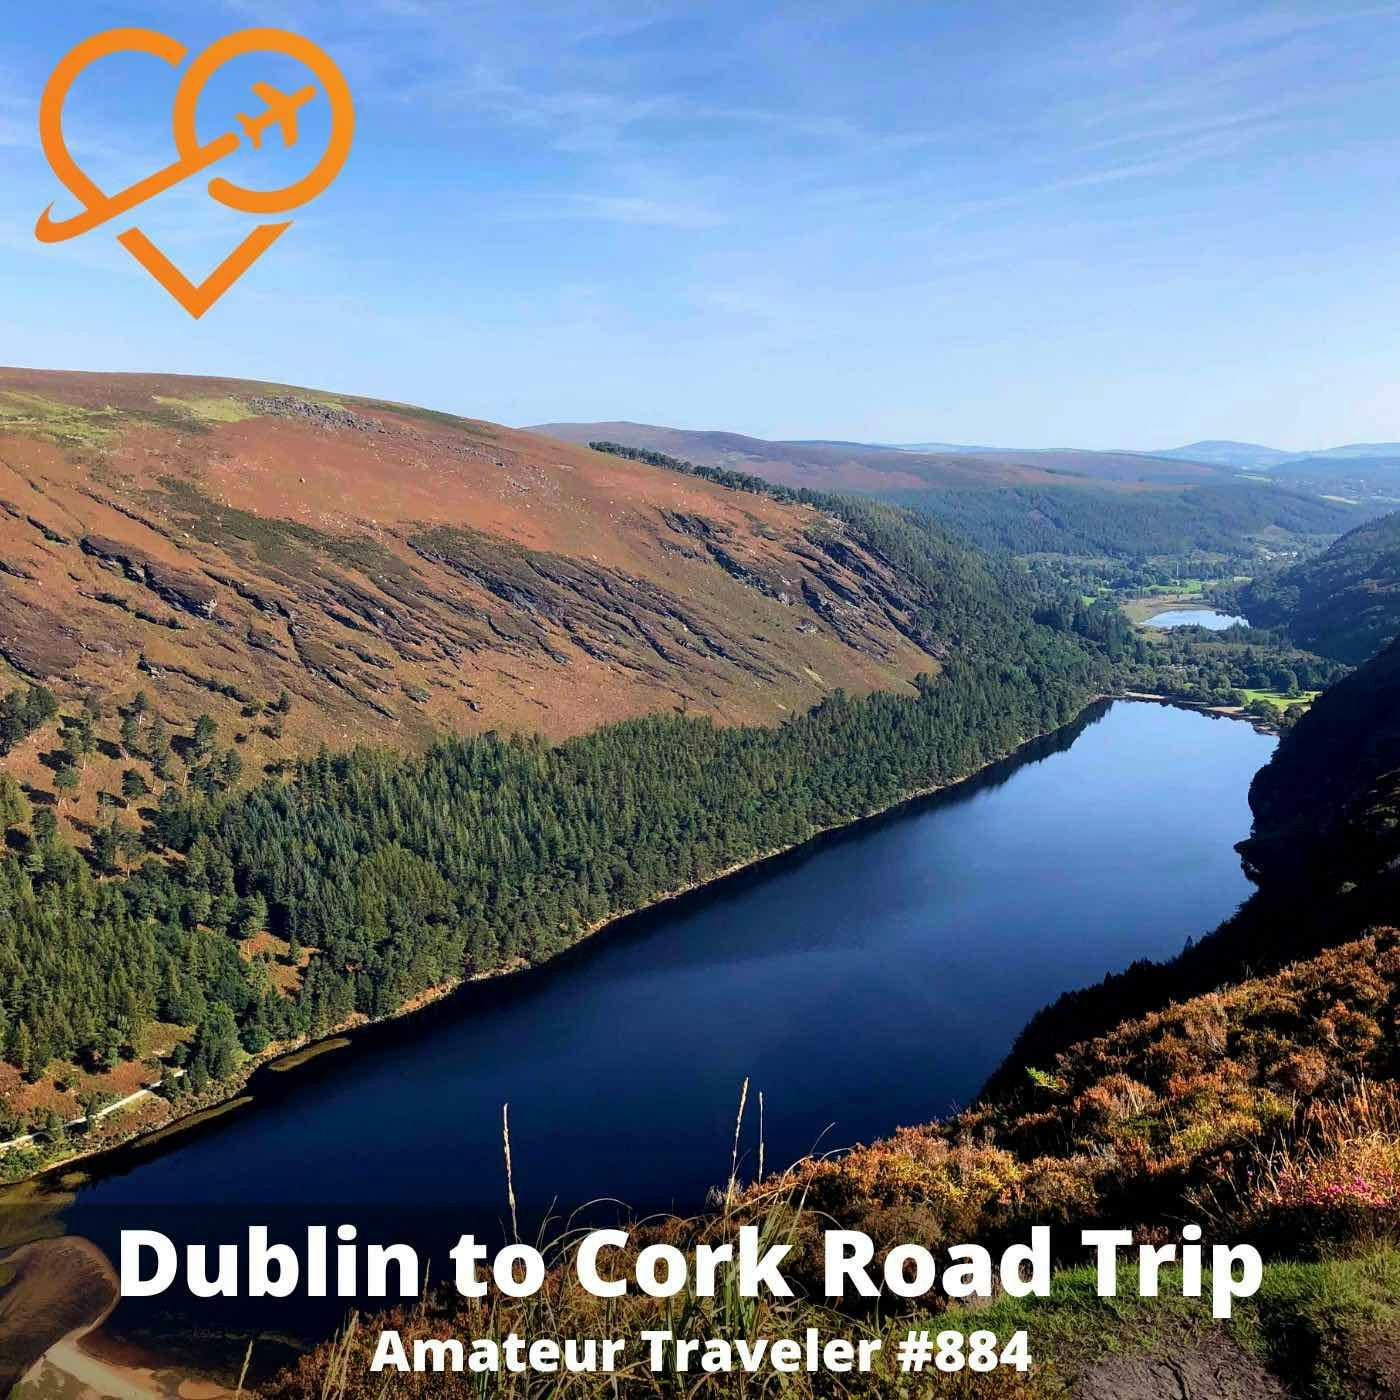 AT#884 - Dublin to Cork Road Trip in Southeastern Ireland